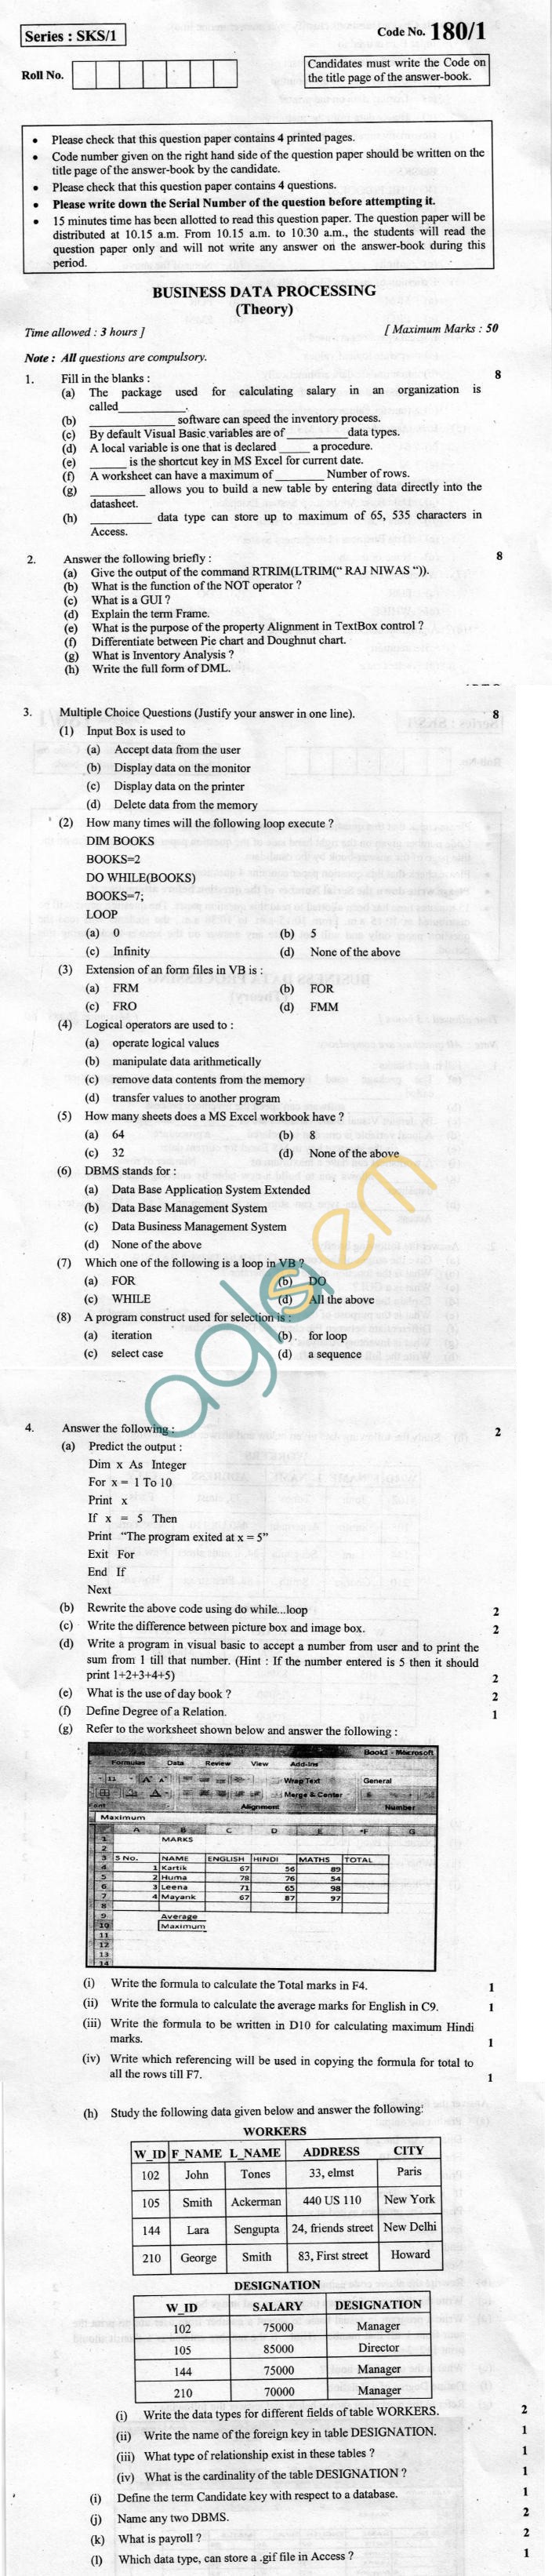 CBSE Board Exam 2013 Class XII Question Paper - Business Data Processing